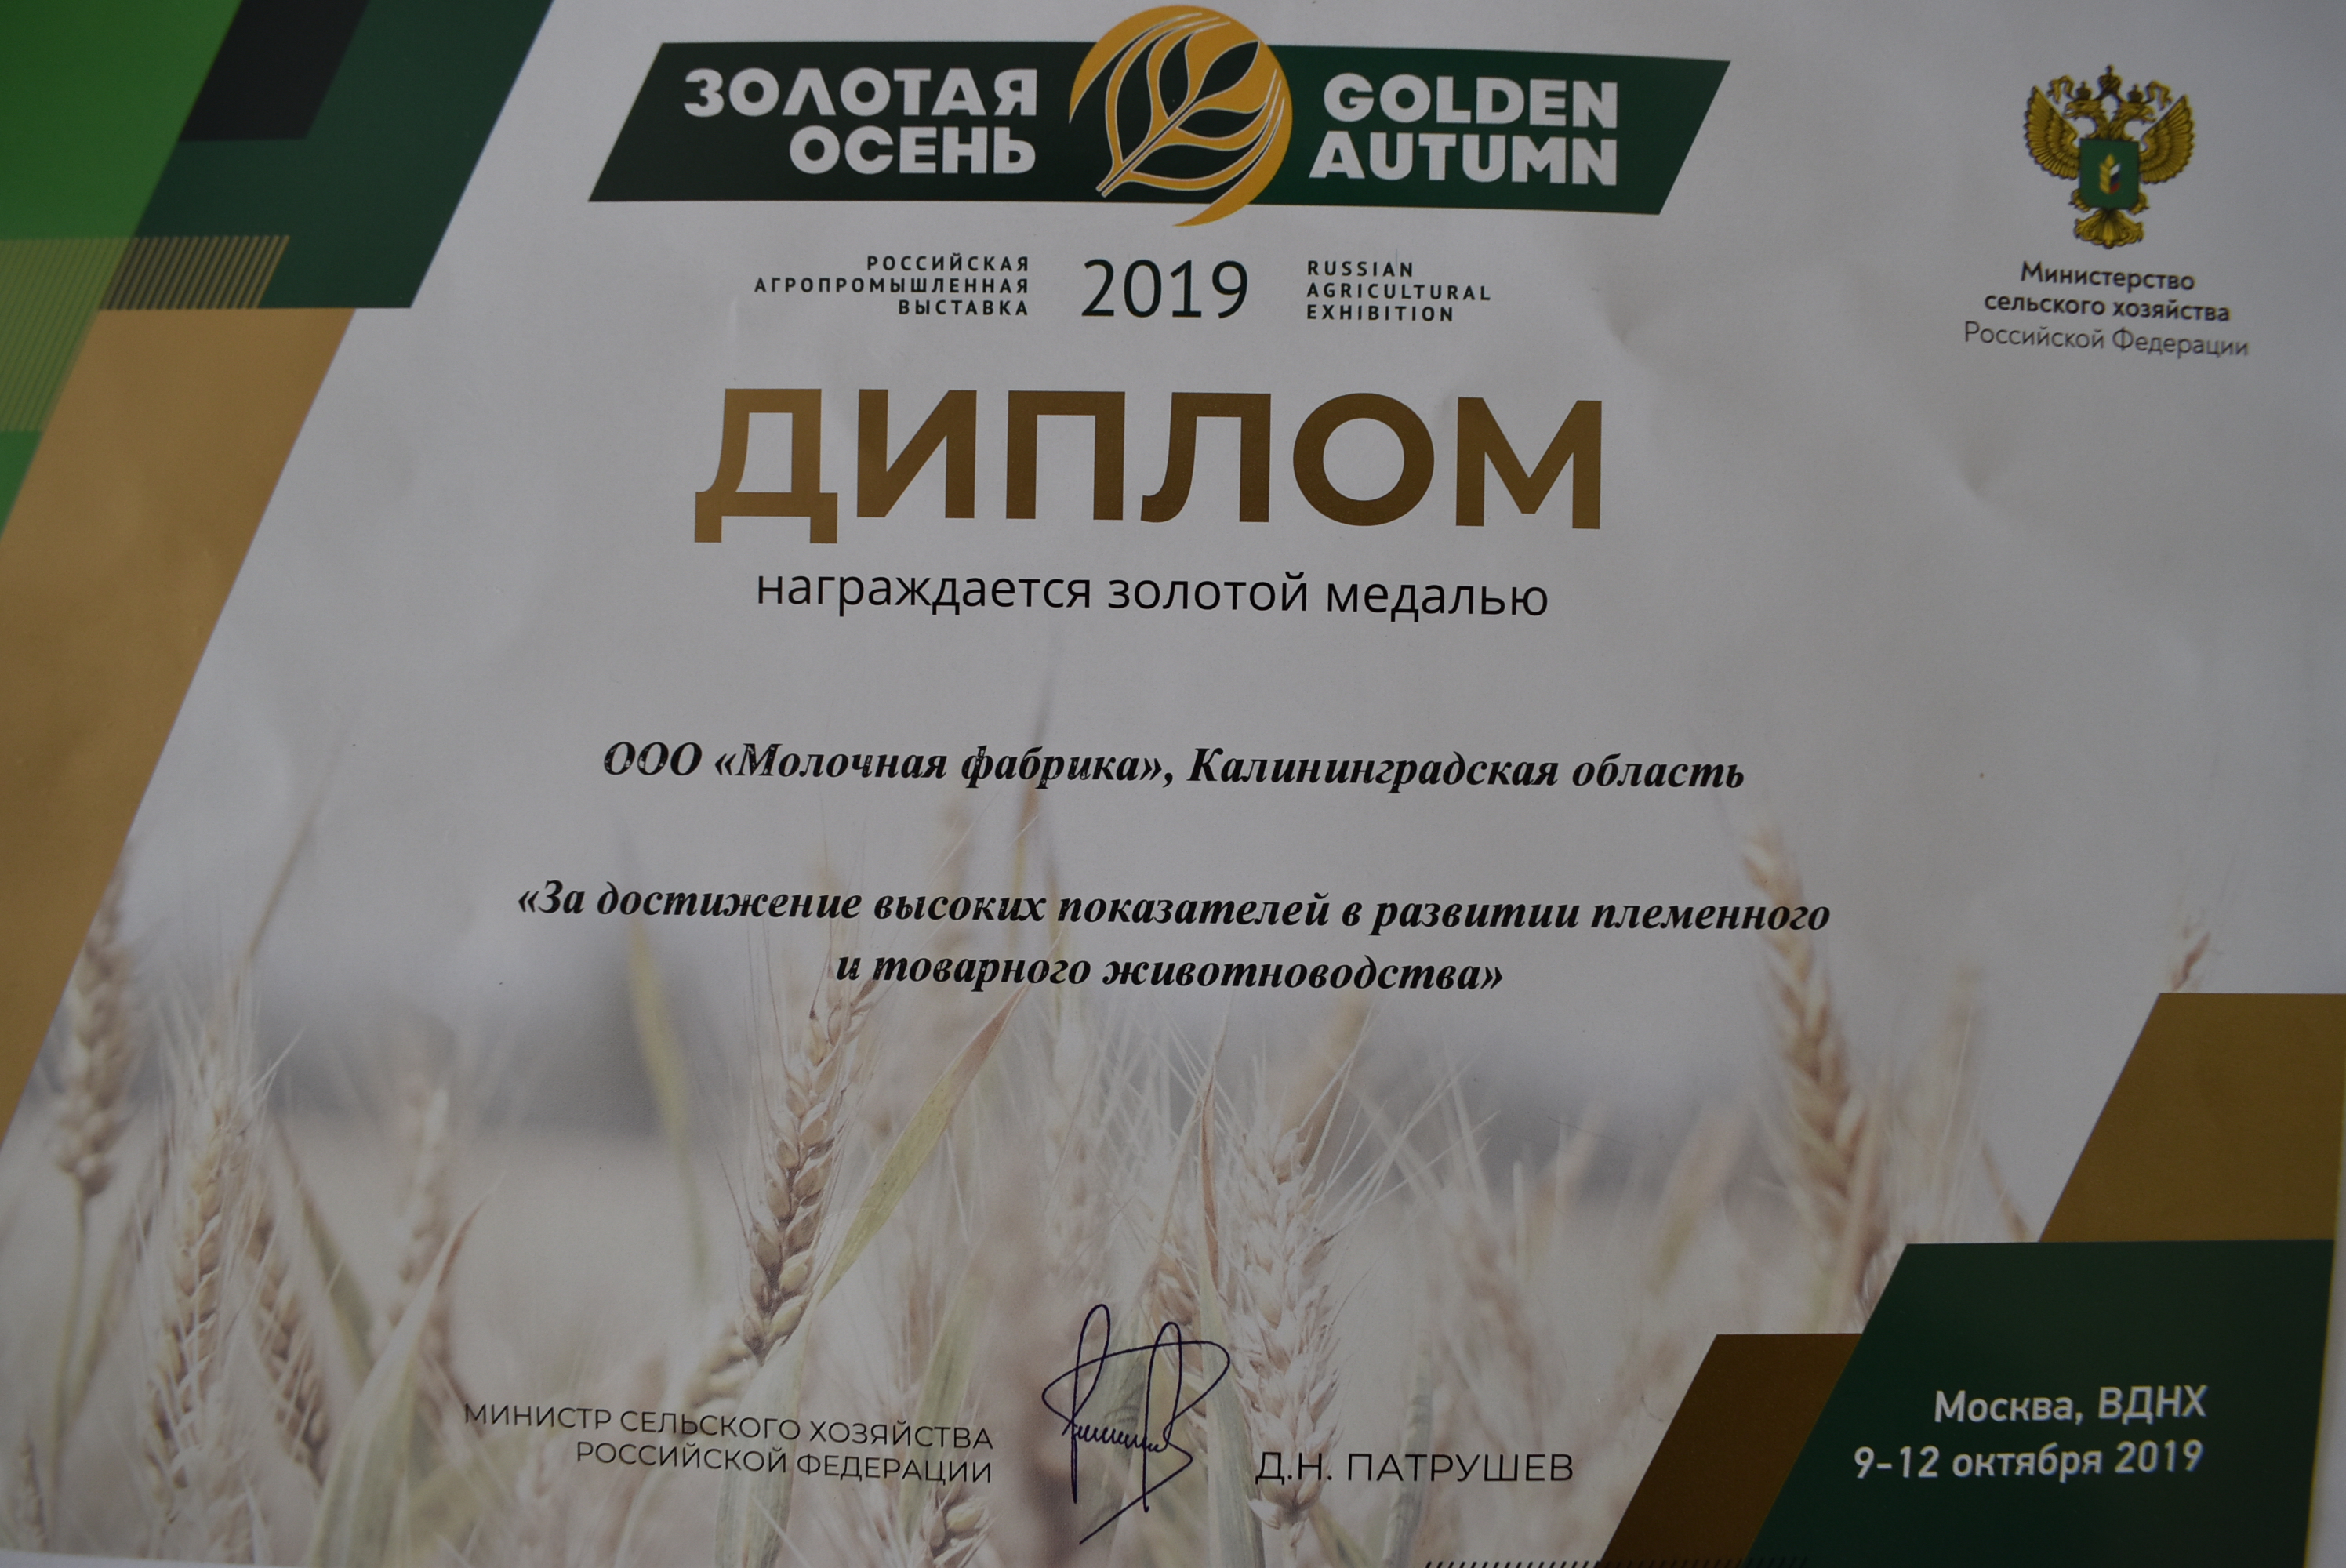 DAIRY FACTORY OF DOLGOVGROUP AGRICULTURAL HOLDING COMPANY WON THE GOLD MEDAL IN THE RUSSIAN COMPETITION